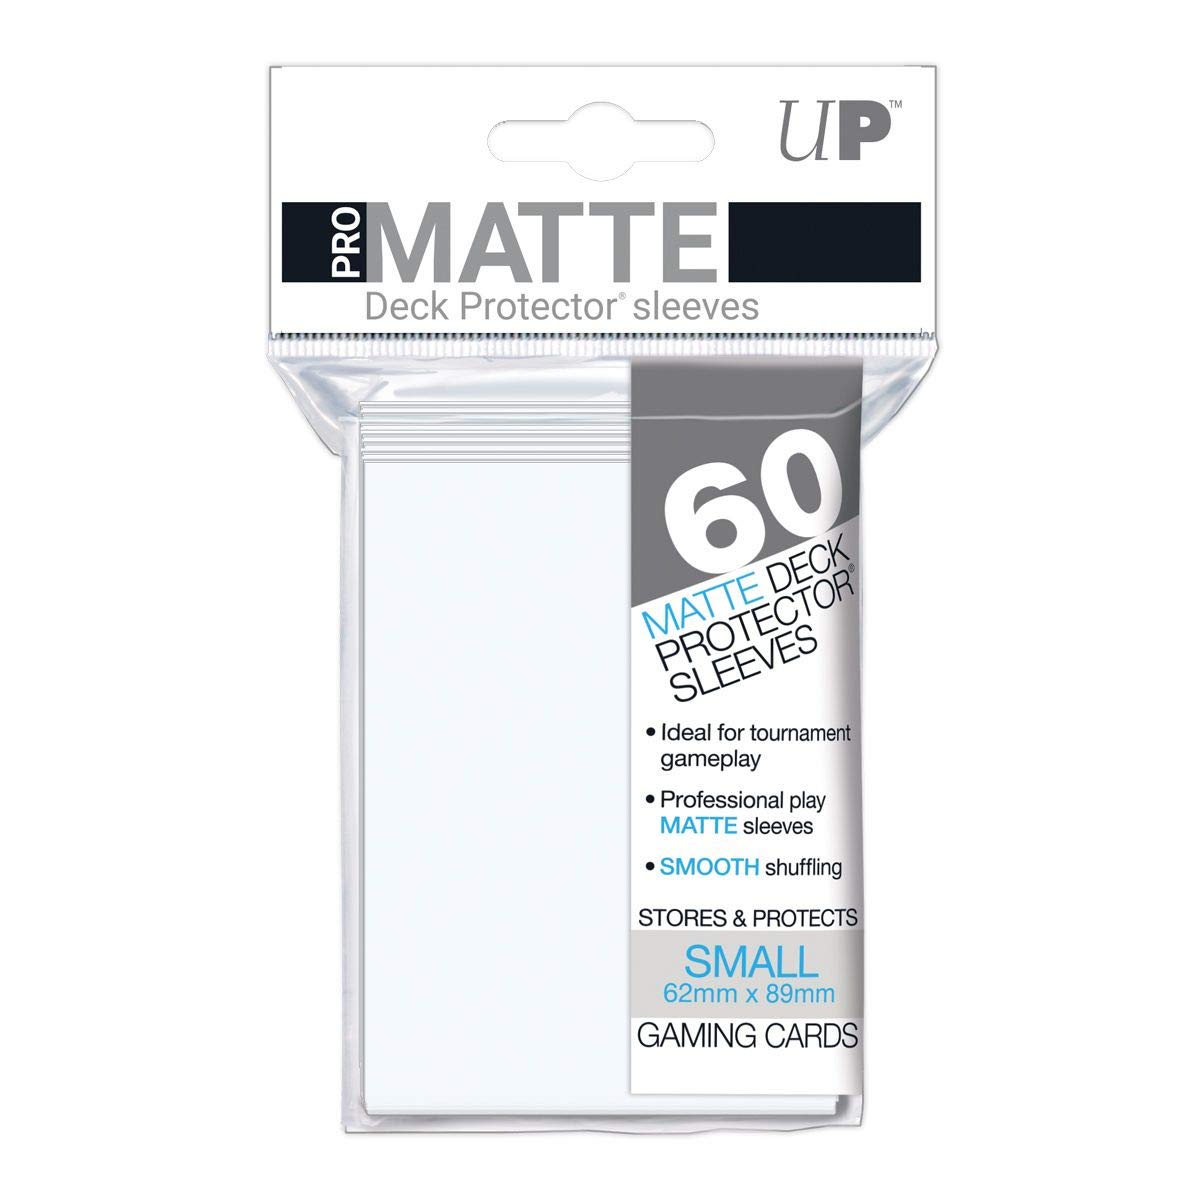 ULTRA PRO PRO-MATTE DECK PROTECTOR SLEEVES - SMALL - WHITE